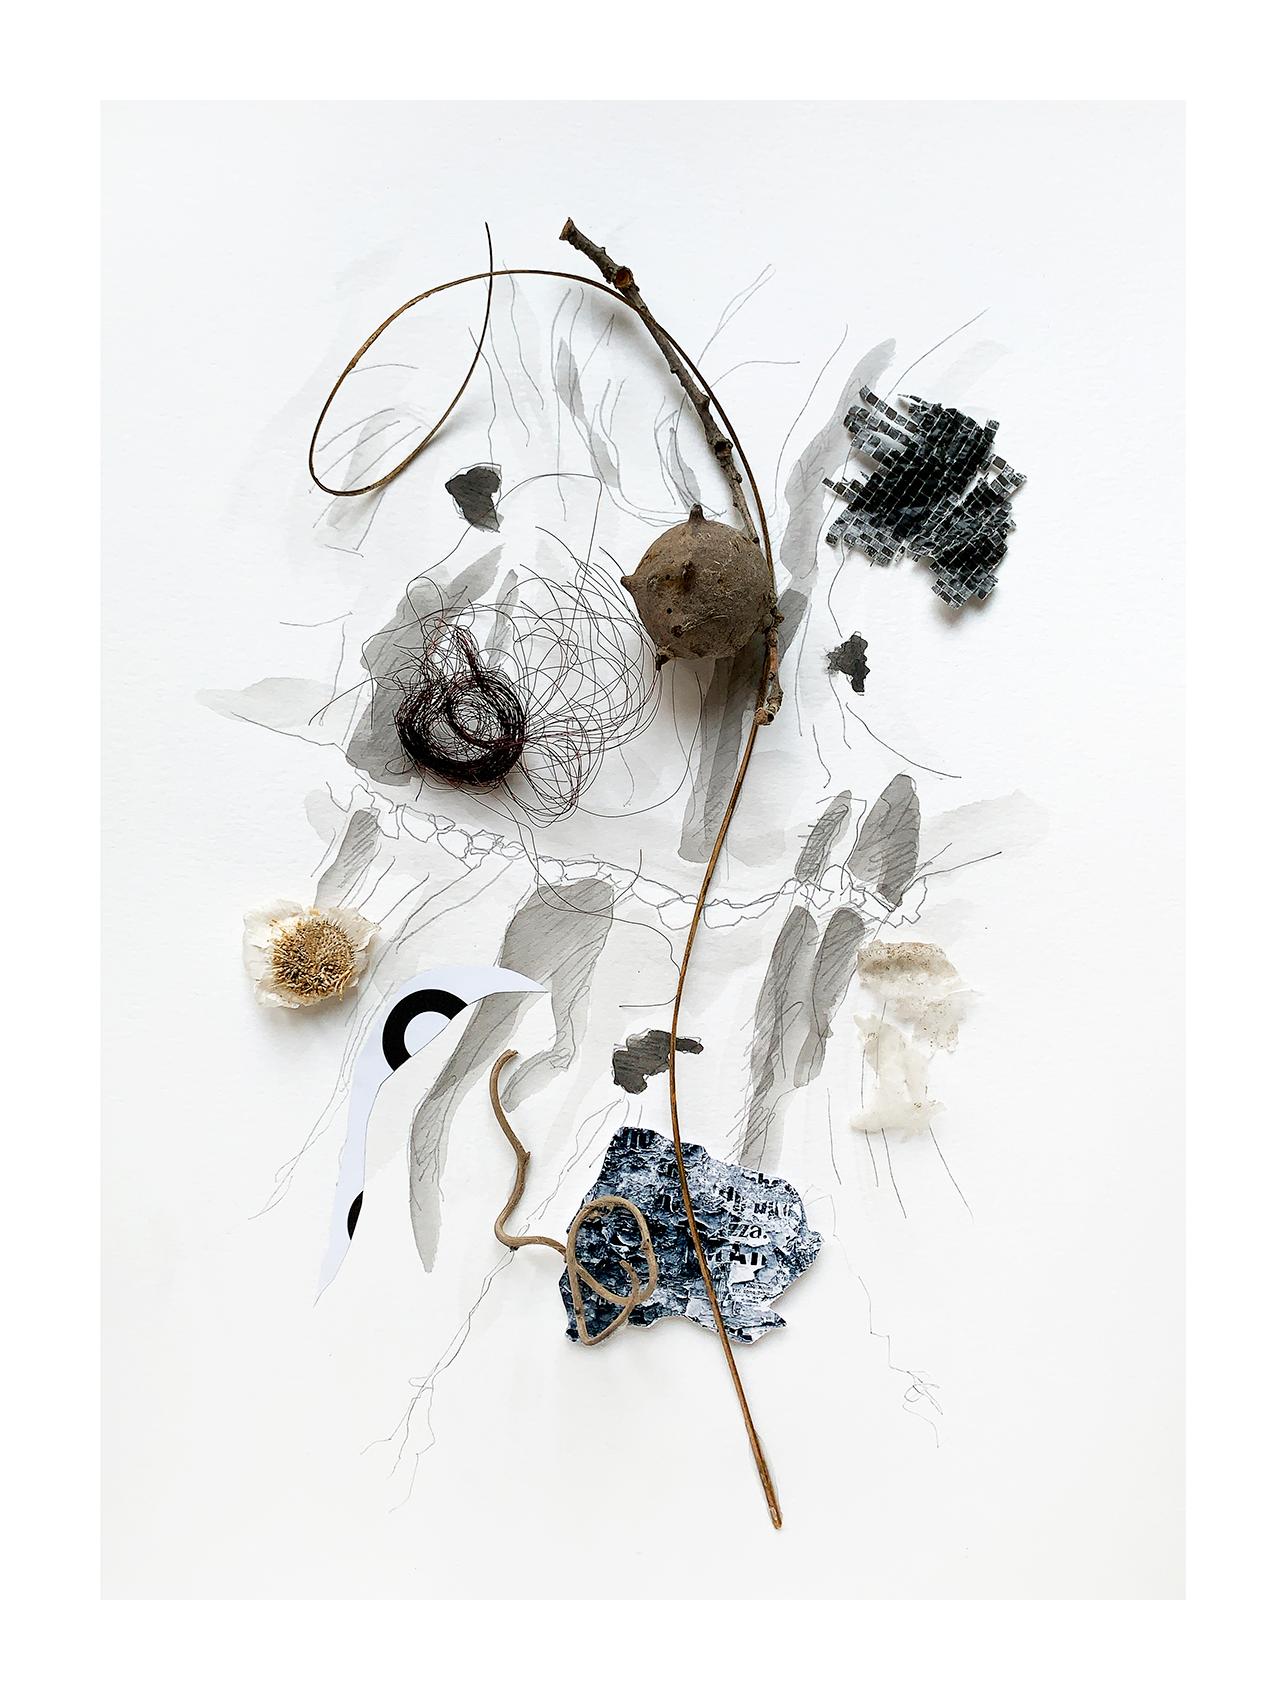 C_21 - Limited Edition Archival Pigment Print of Collage Still Life For Sale 2